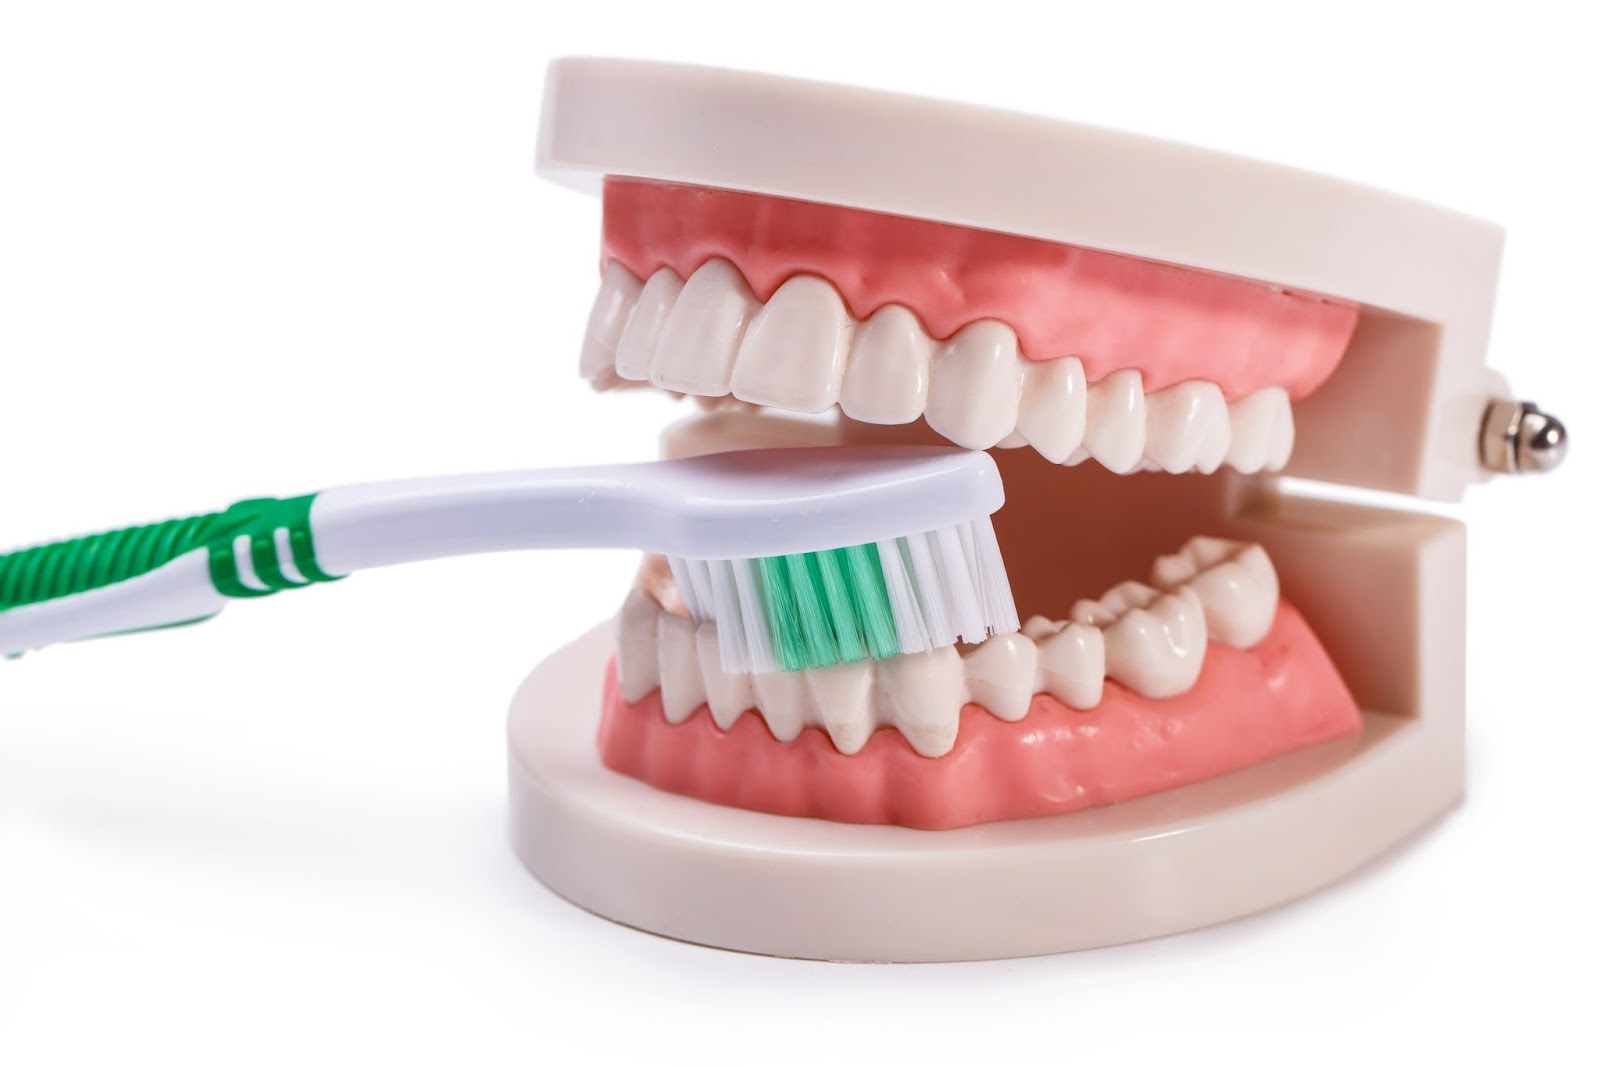 Teeth cleaning with Soft bristle toothbrush